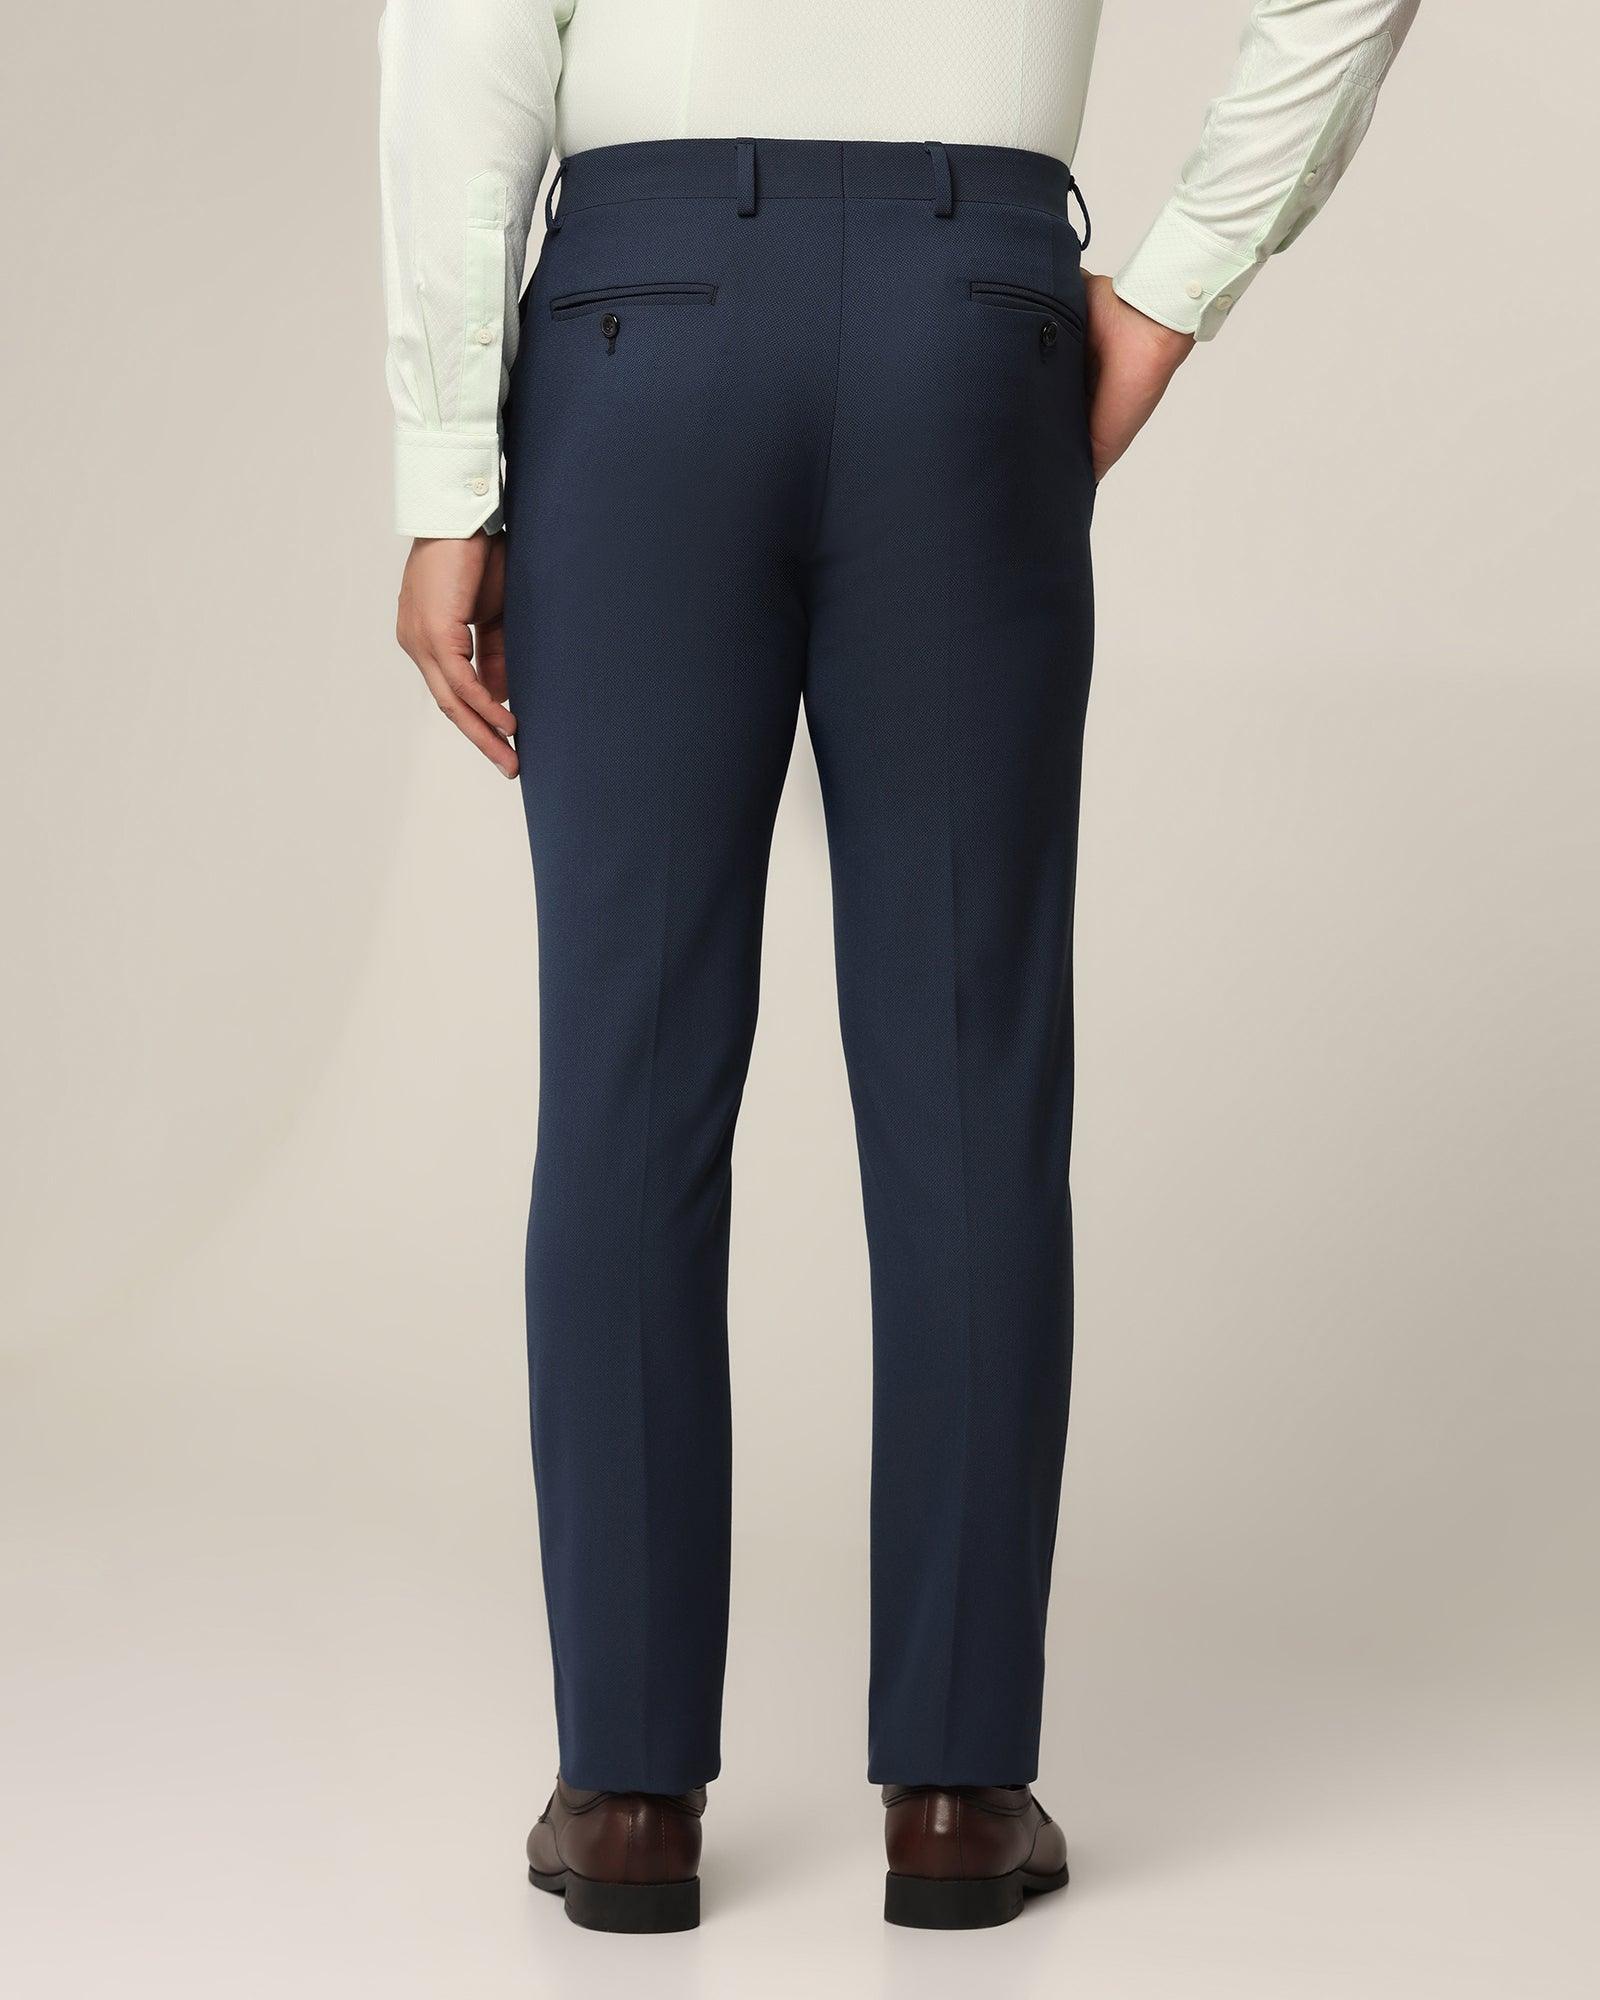 Ted Baker | Slim Fit Black Panama Suit Trousers |The Shirt Store